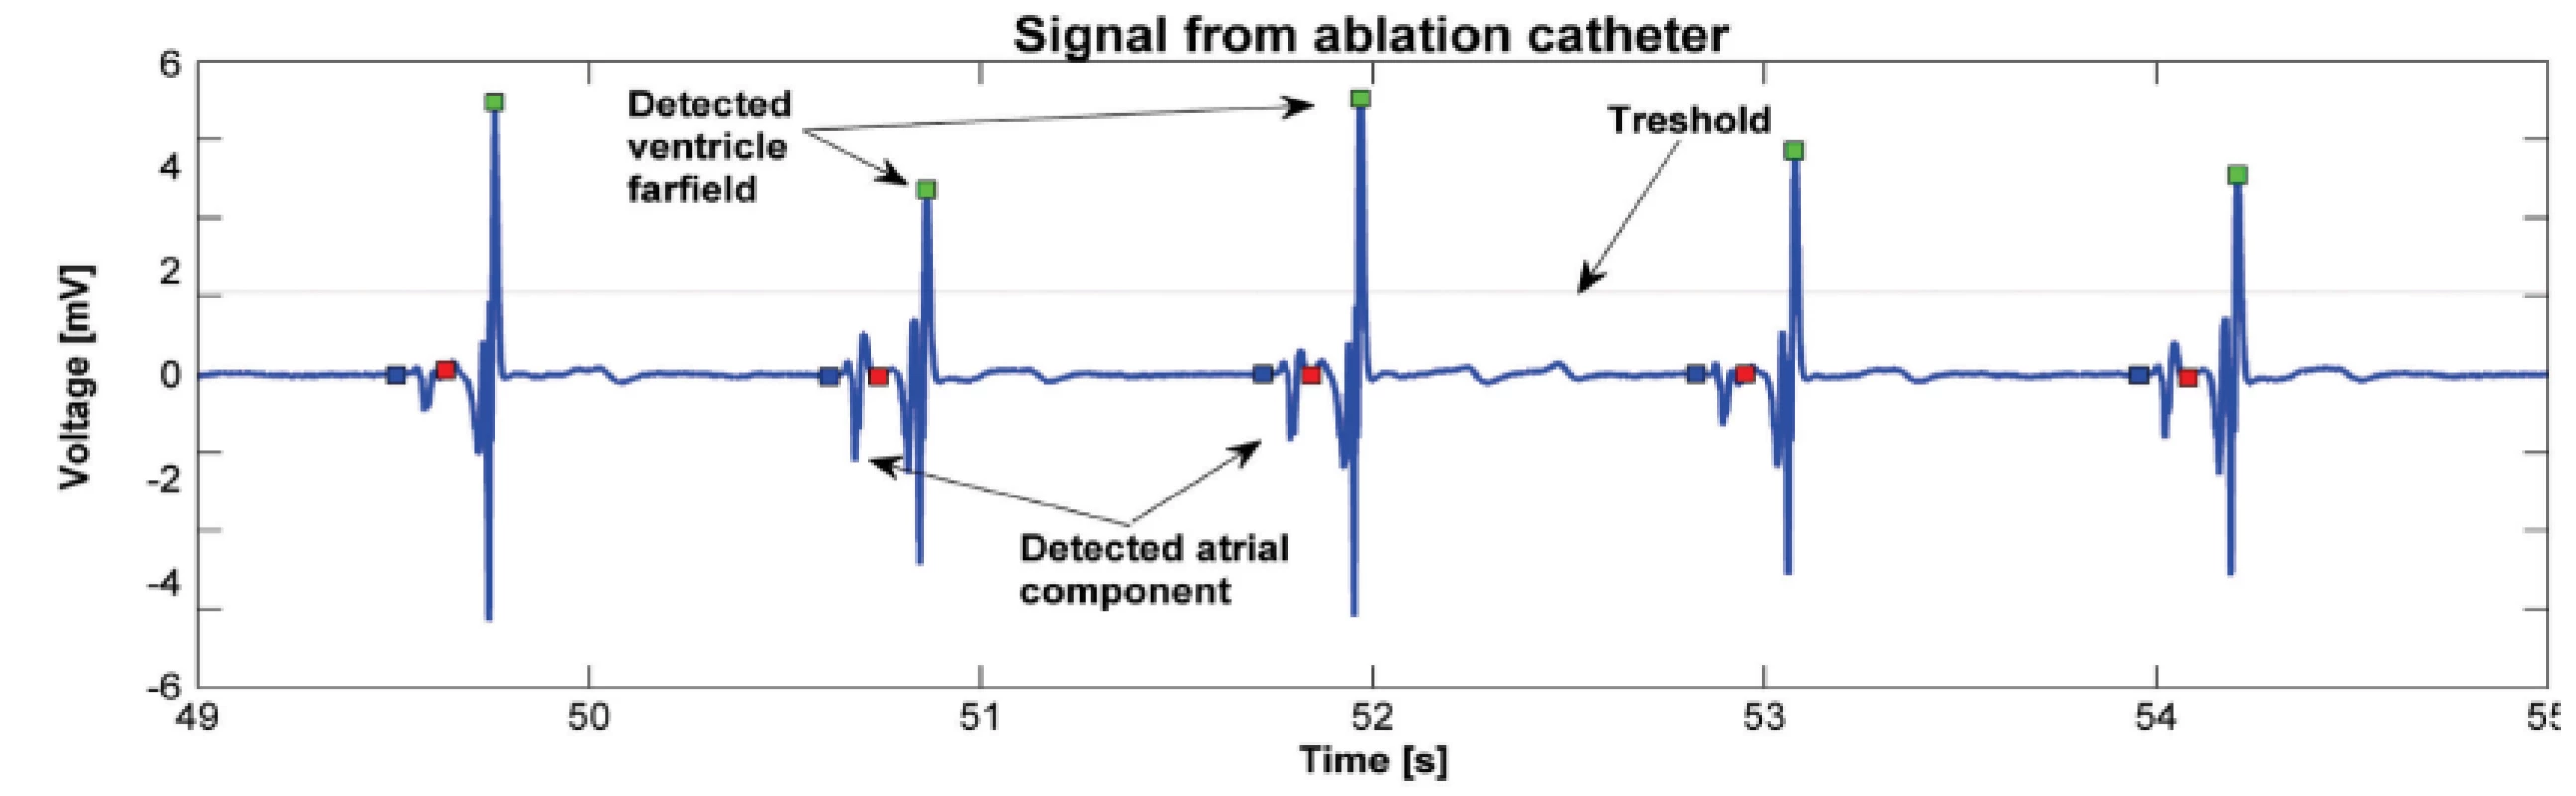 Activation wave detection using thresholding. Atrial component of the signal in front of the ventricle far-field is selected for further analysis.